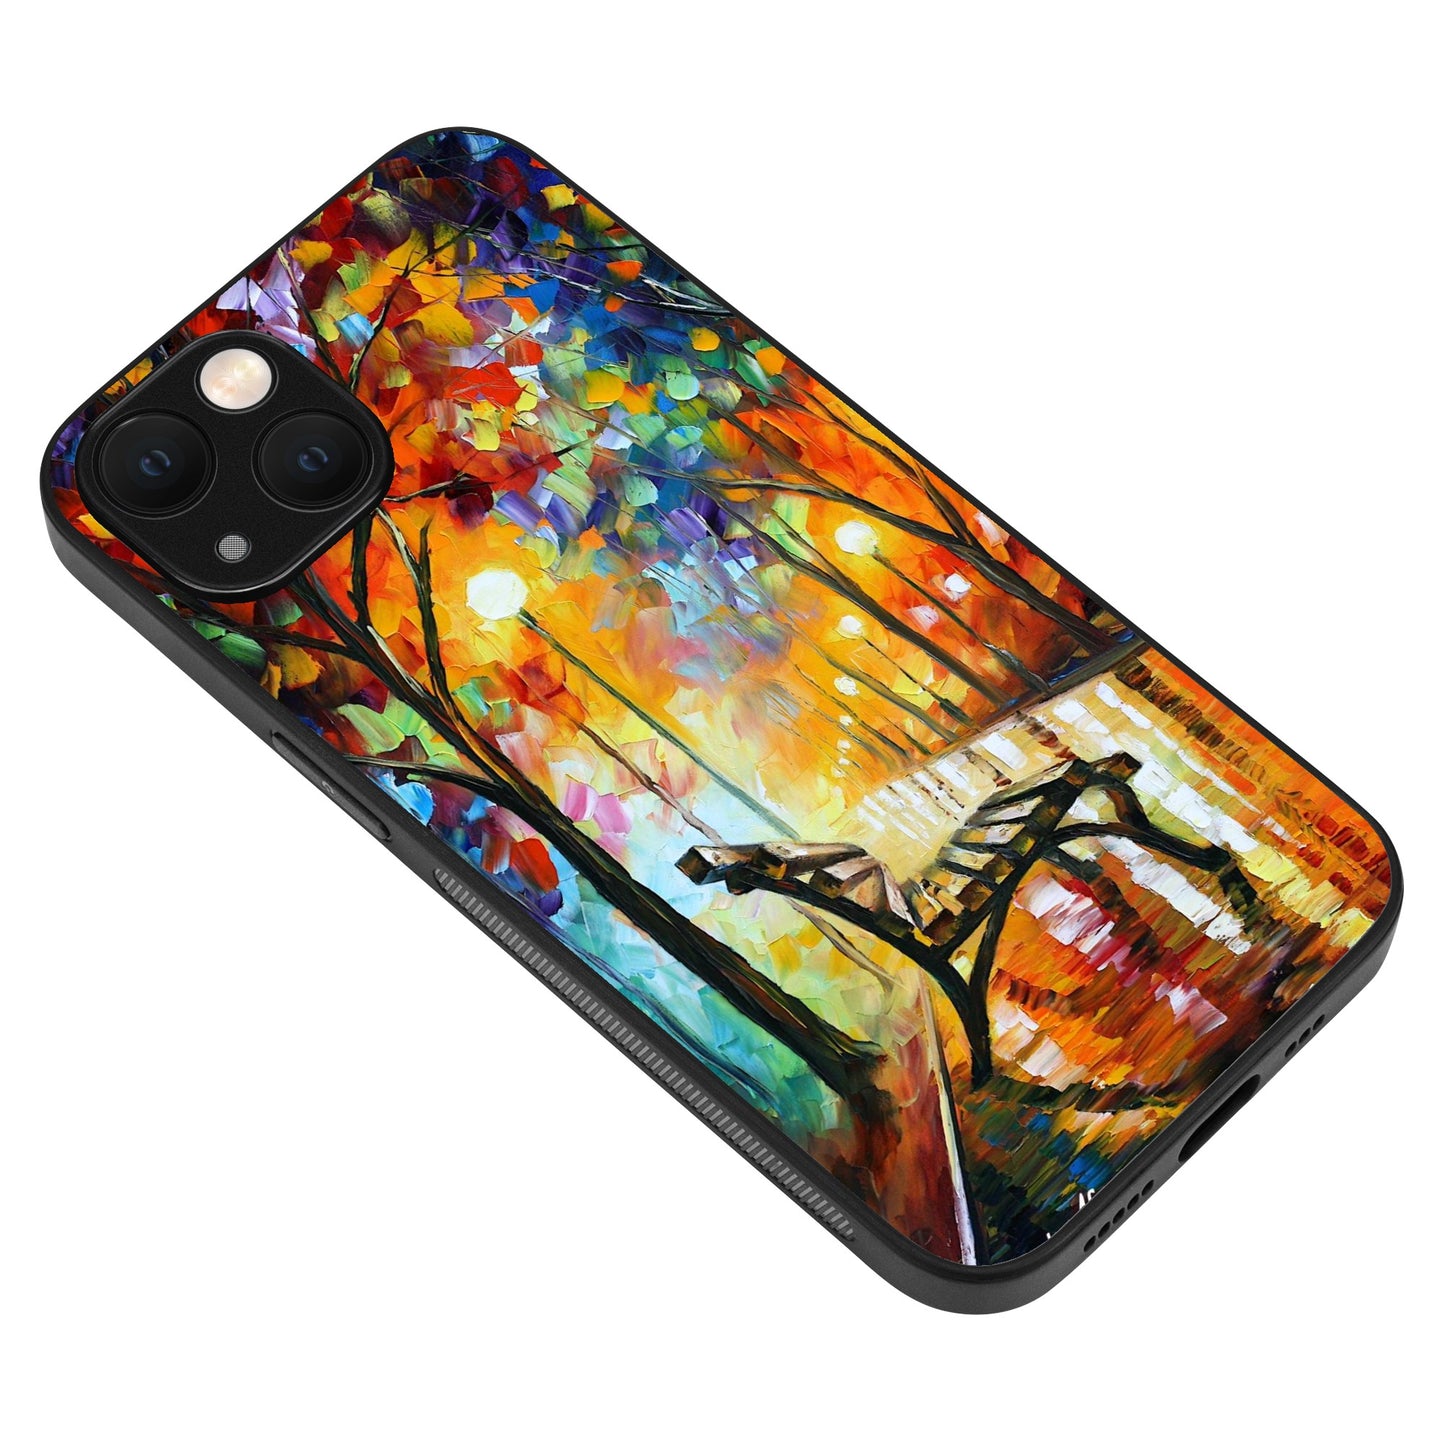 iPhone13 Series Phone Cases Afremov THE LONELINESS OF AUTUMN